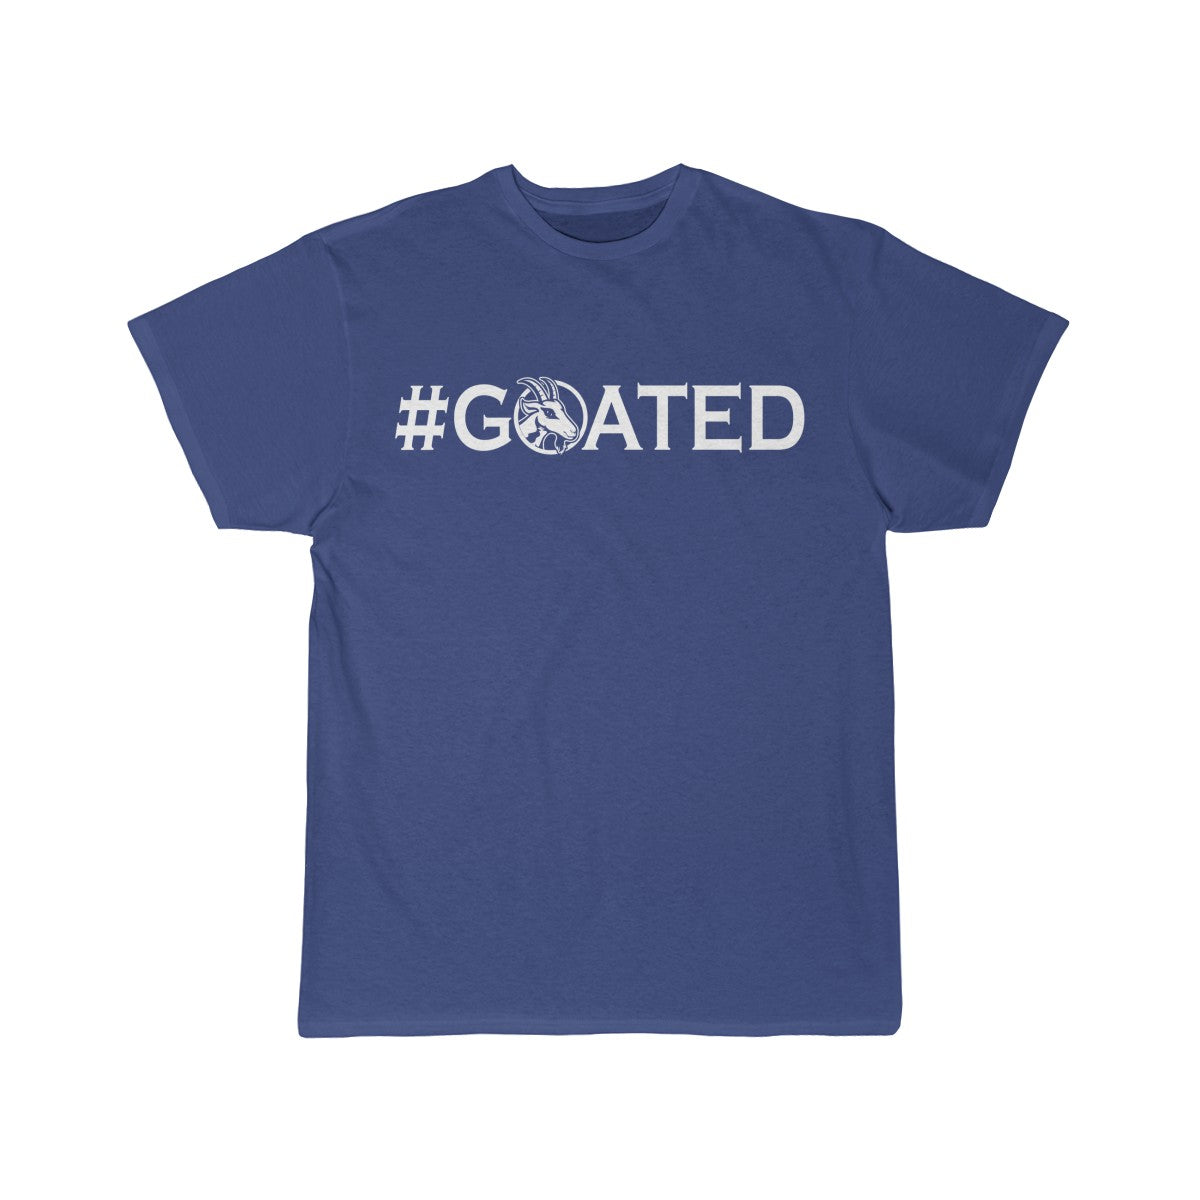 Goated t-shirt